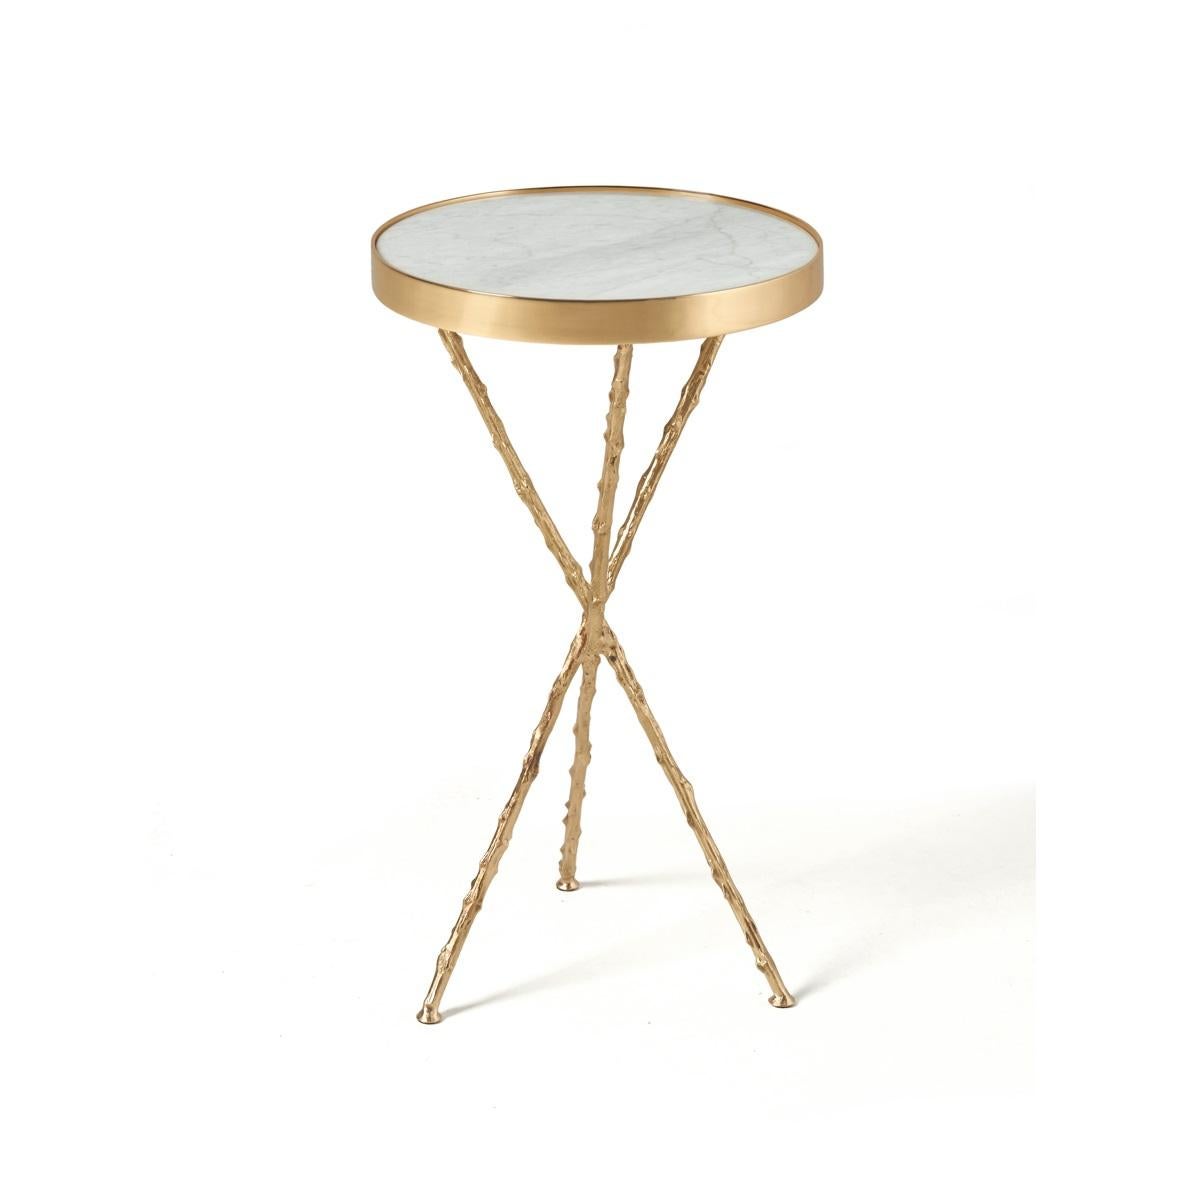 The sculptural legs of this side table are made from immortalized rosebush branches, molded in brass casting. Coupled with a minimalistic and elegant marble top.
Top: Marble
Rim: Brass, Nickel or Copper in polished, brushed or antique